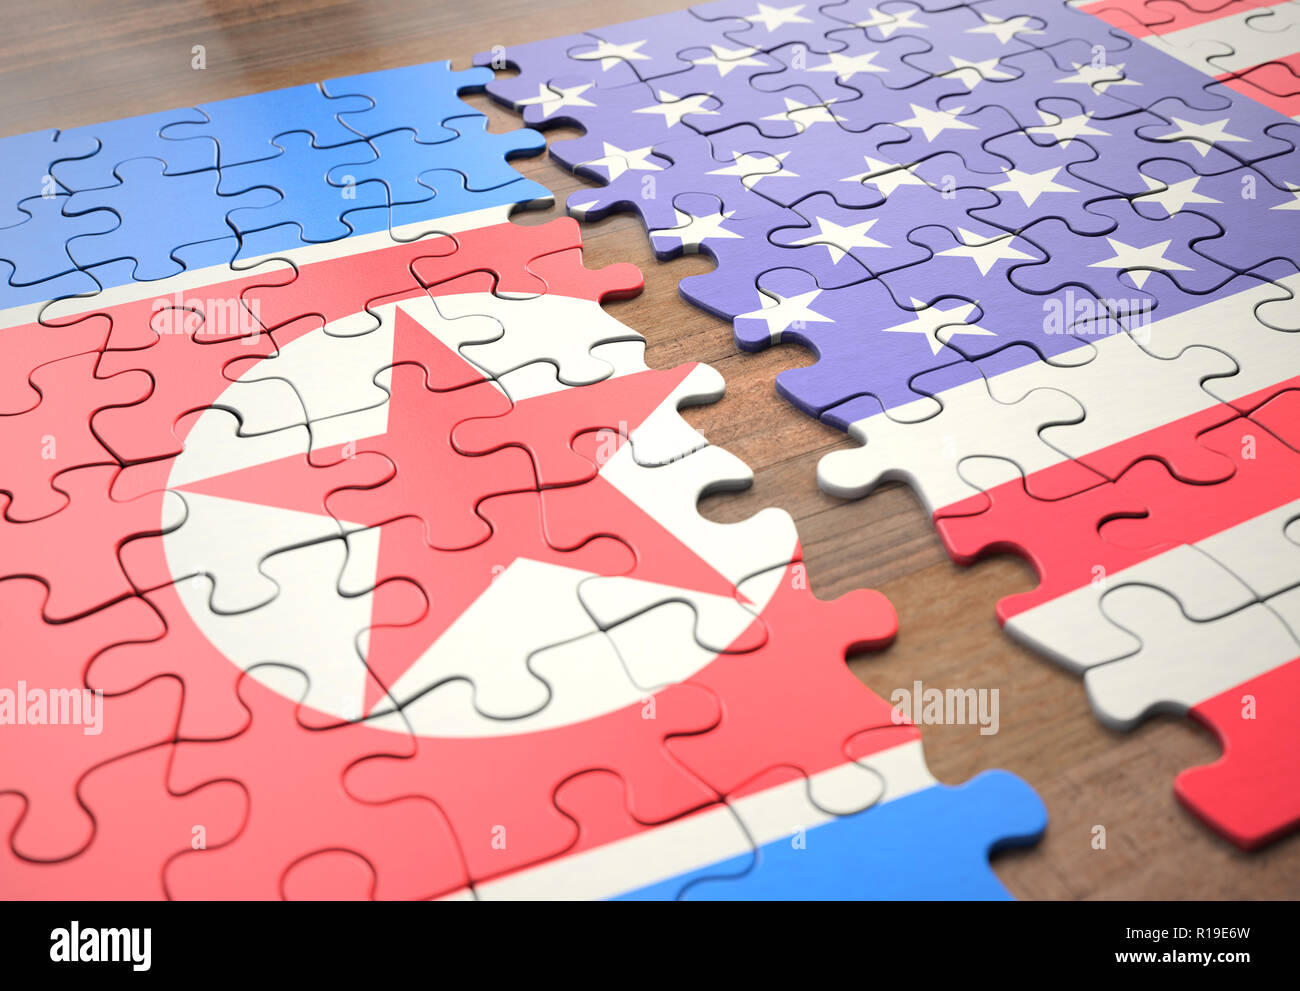 Two nations joining in a puzzle game that represents union, peace, commerce, social and human agreement. Stock Photo